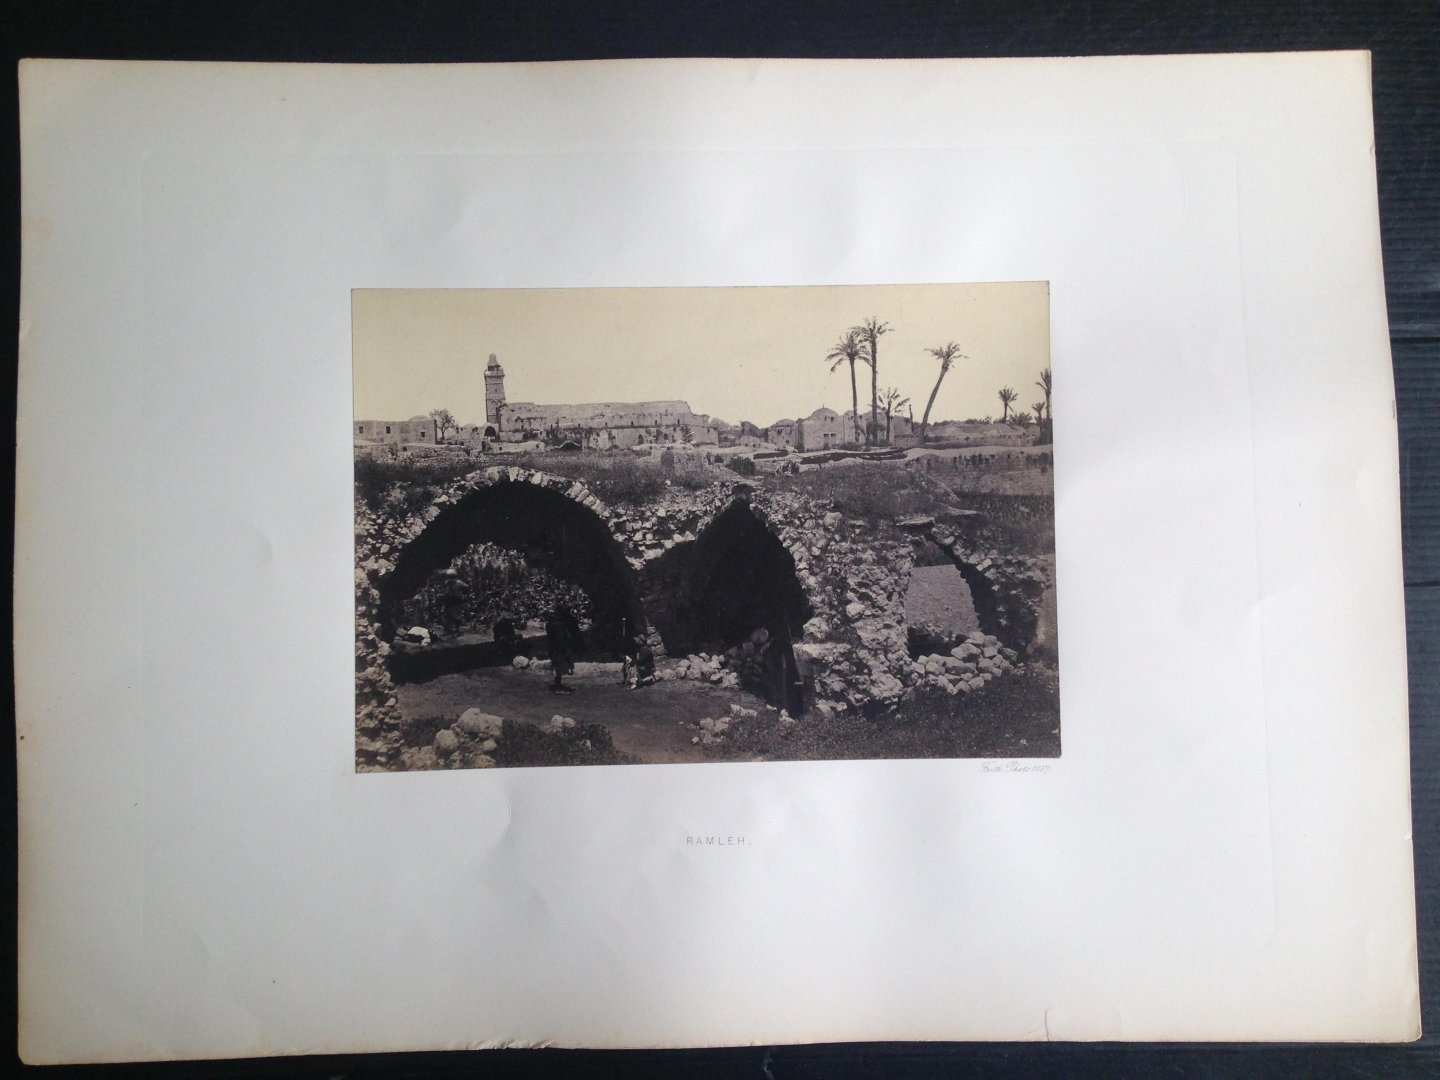 Frith, Francis - Ramleh, Series Egypt and Palestine